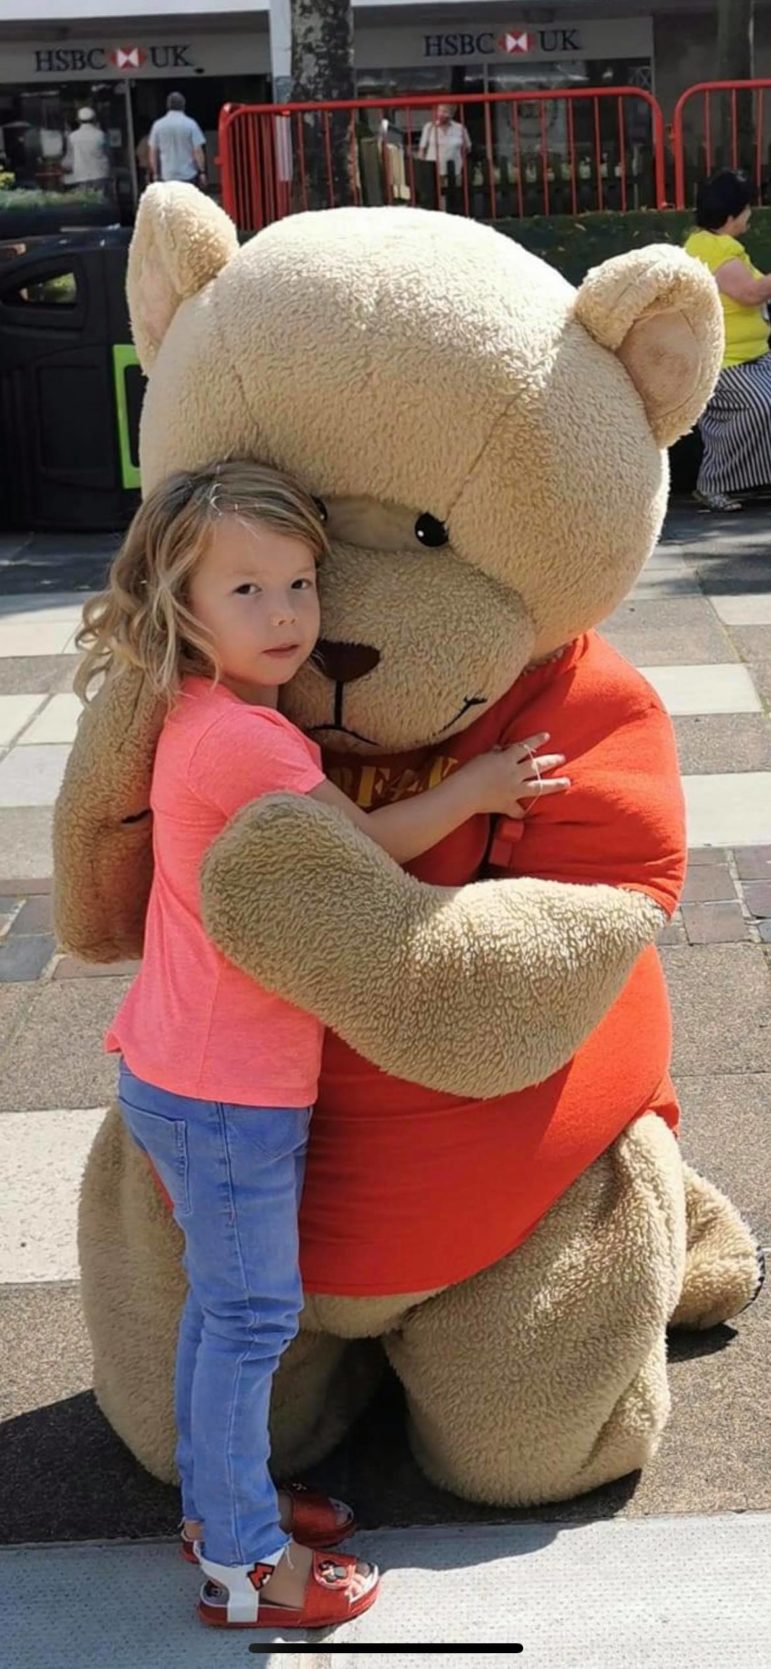 A child and a large toy bear